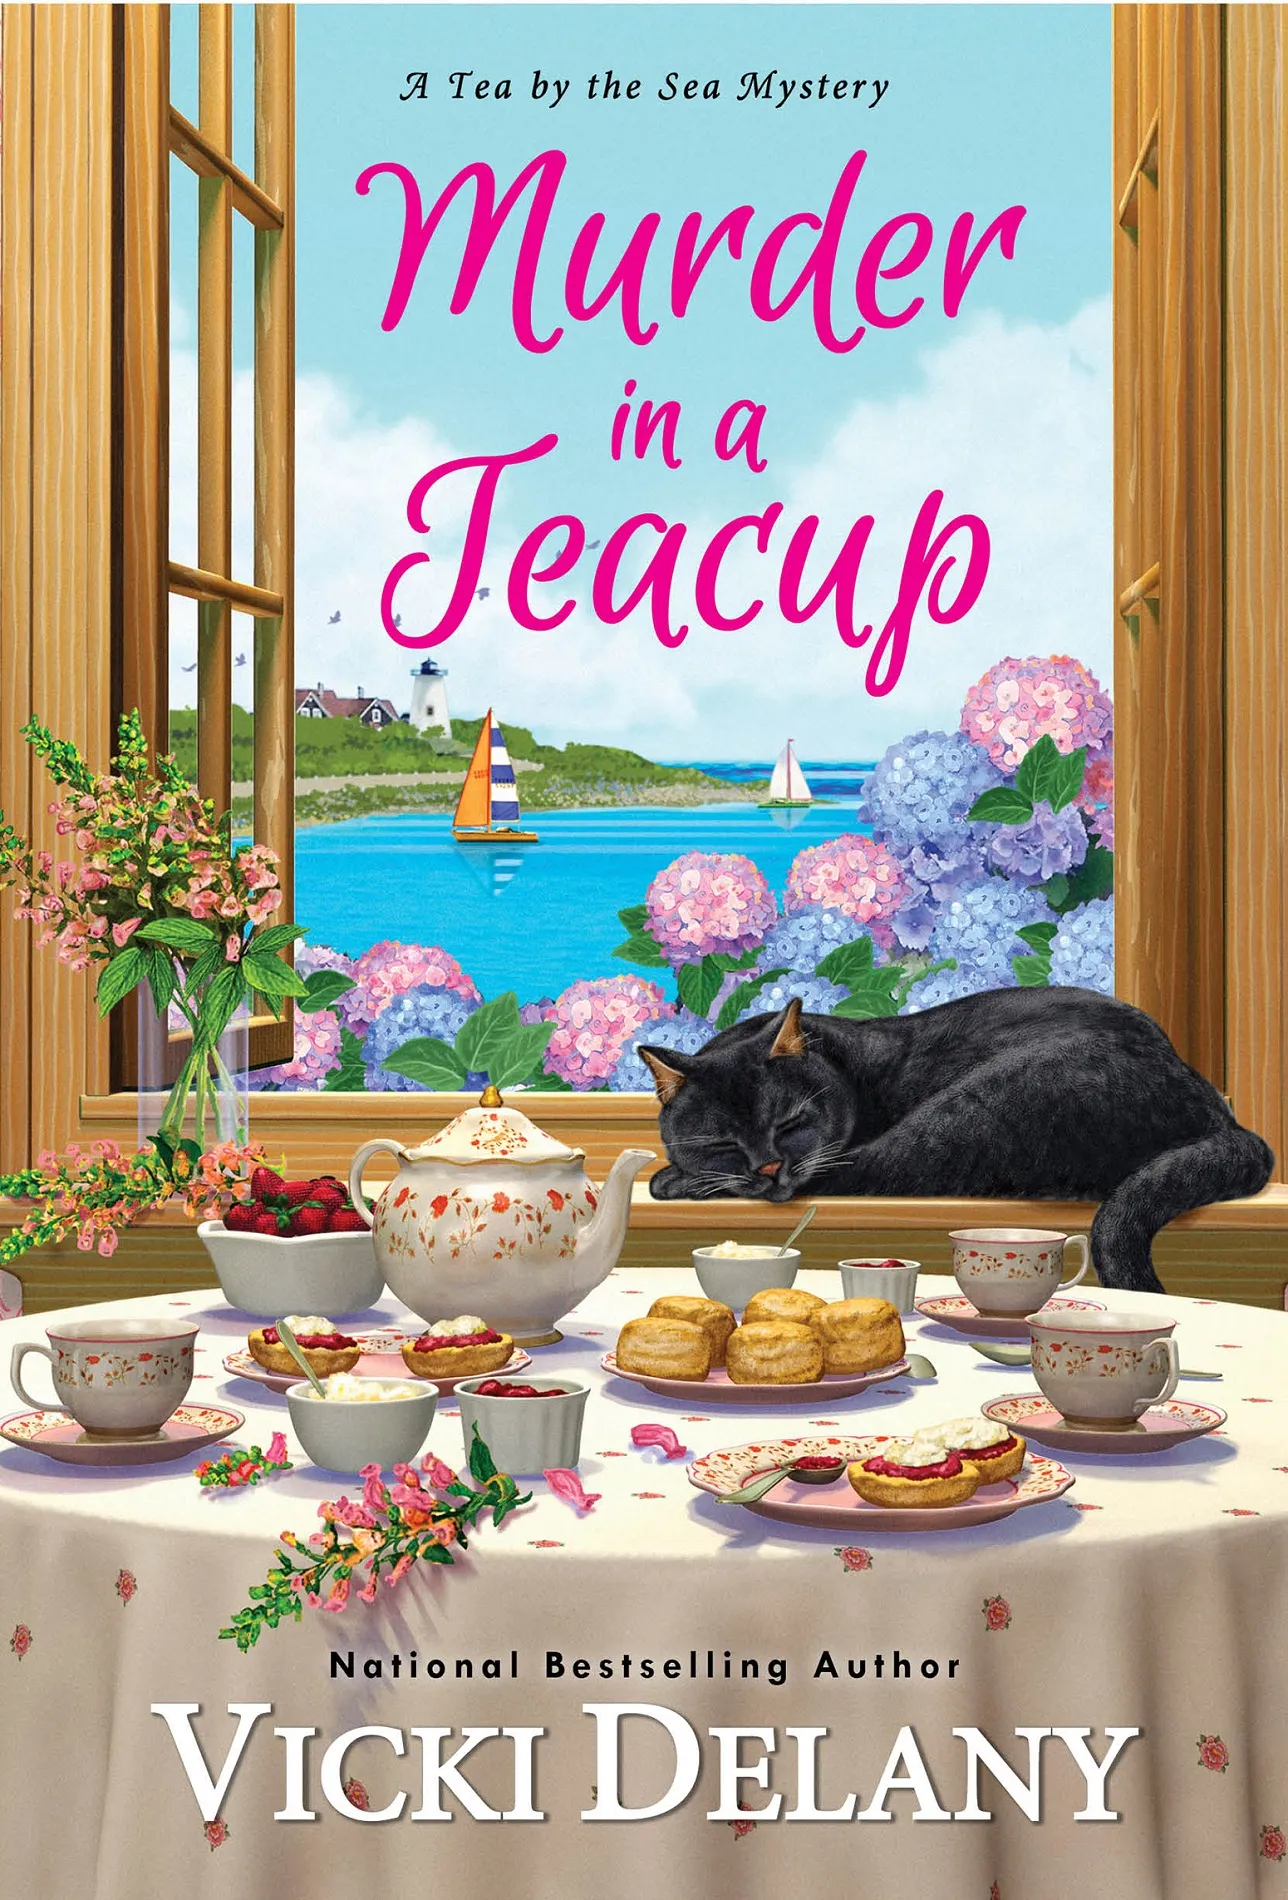 Murder in a Teacup (Tea by the Sea Mysteries #2)